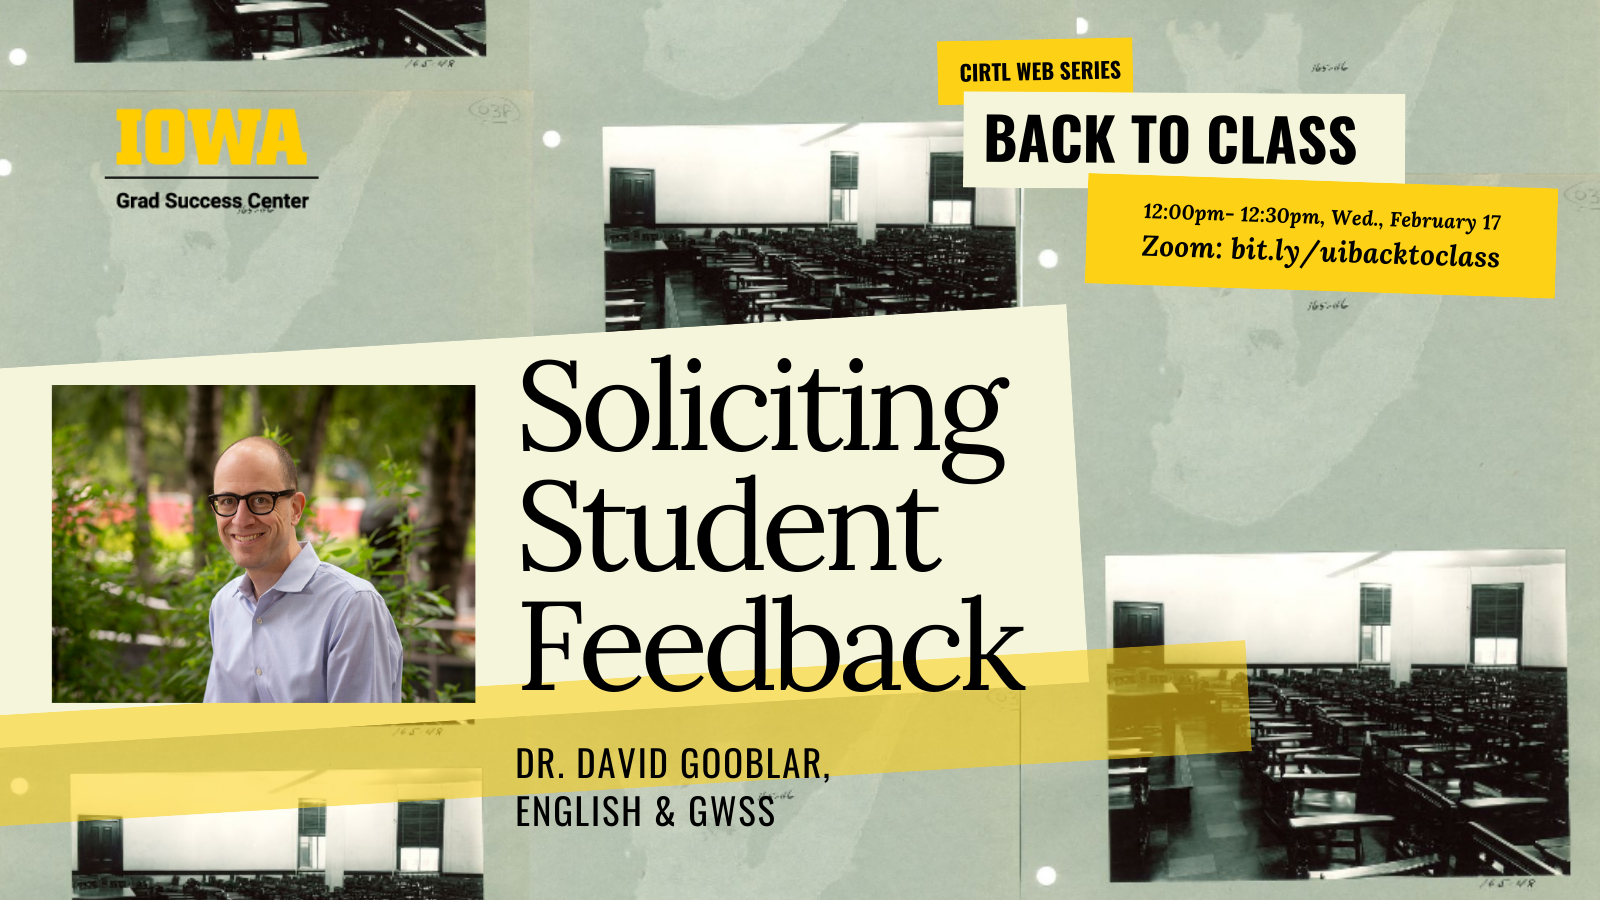 Soliciting Student Feedback (CIRTL Back to Class Series)  promotional image